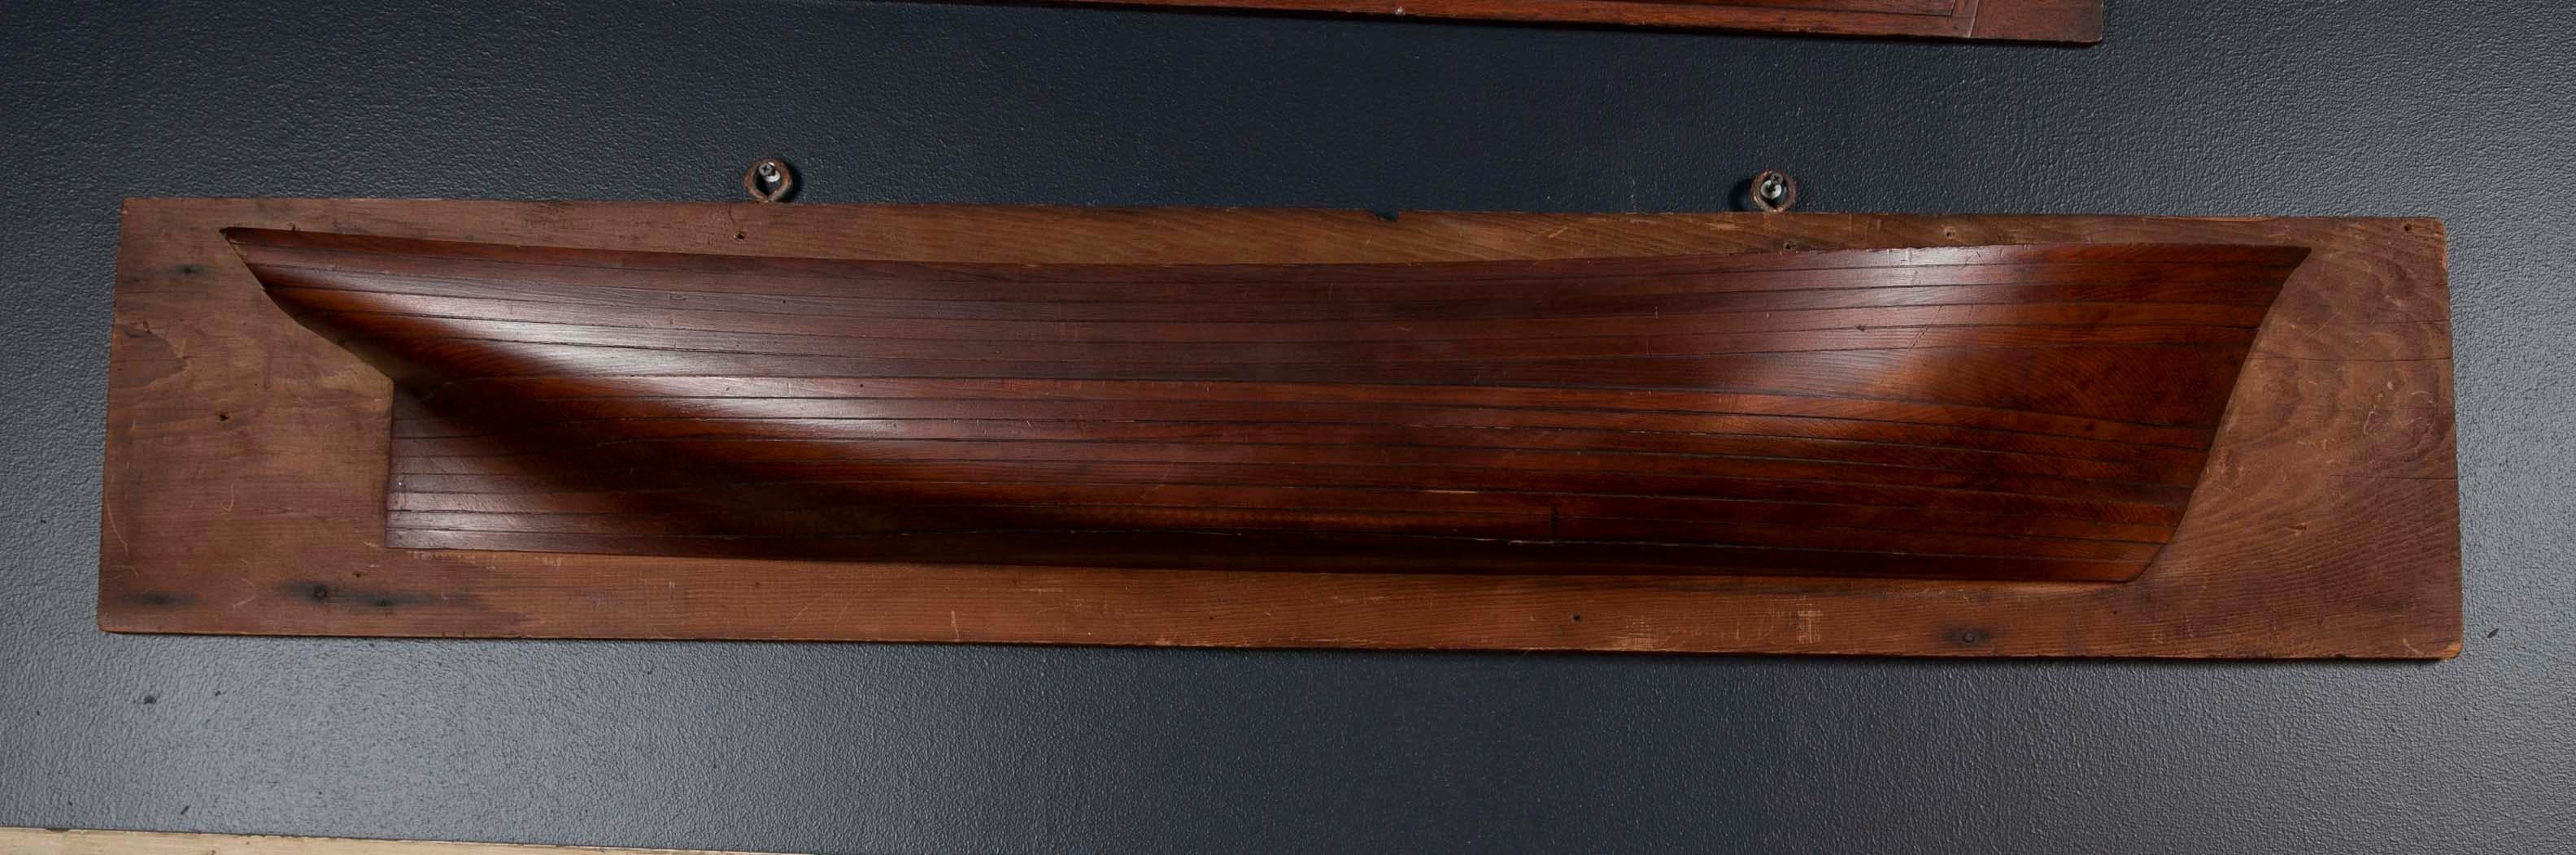 19th century American builder's model of a ship in mahogany done in many laminated layers together.

# 1523.